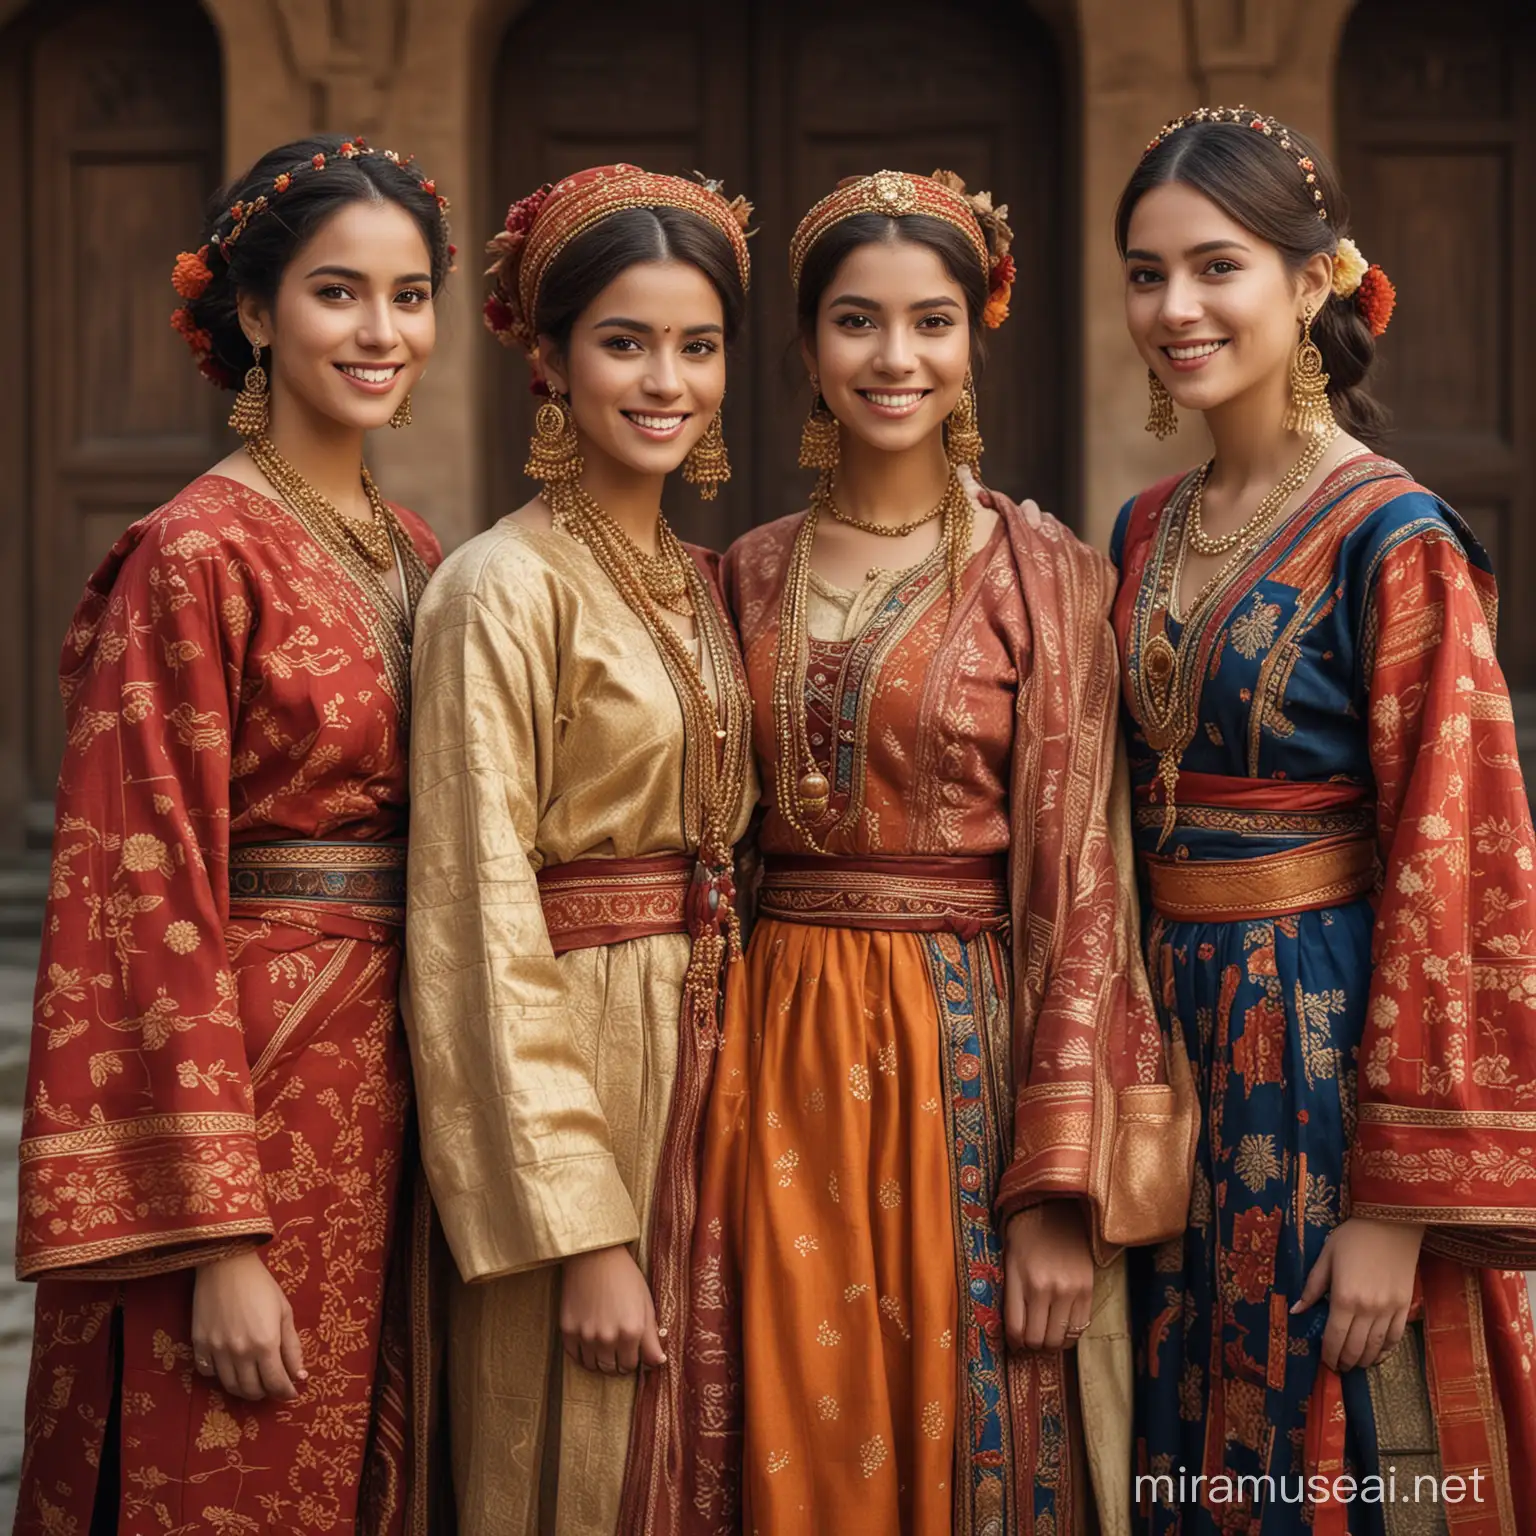 "Celebrate the beauty of diversity as Sarah and her friends pose in traditional attire from different cultures, the HD clarity highlighting the richness of heritage."
